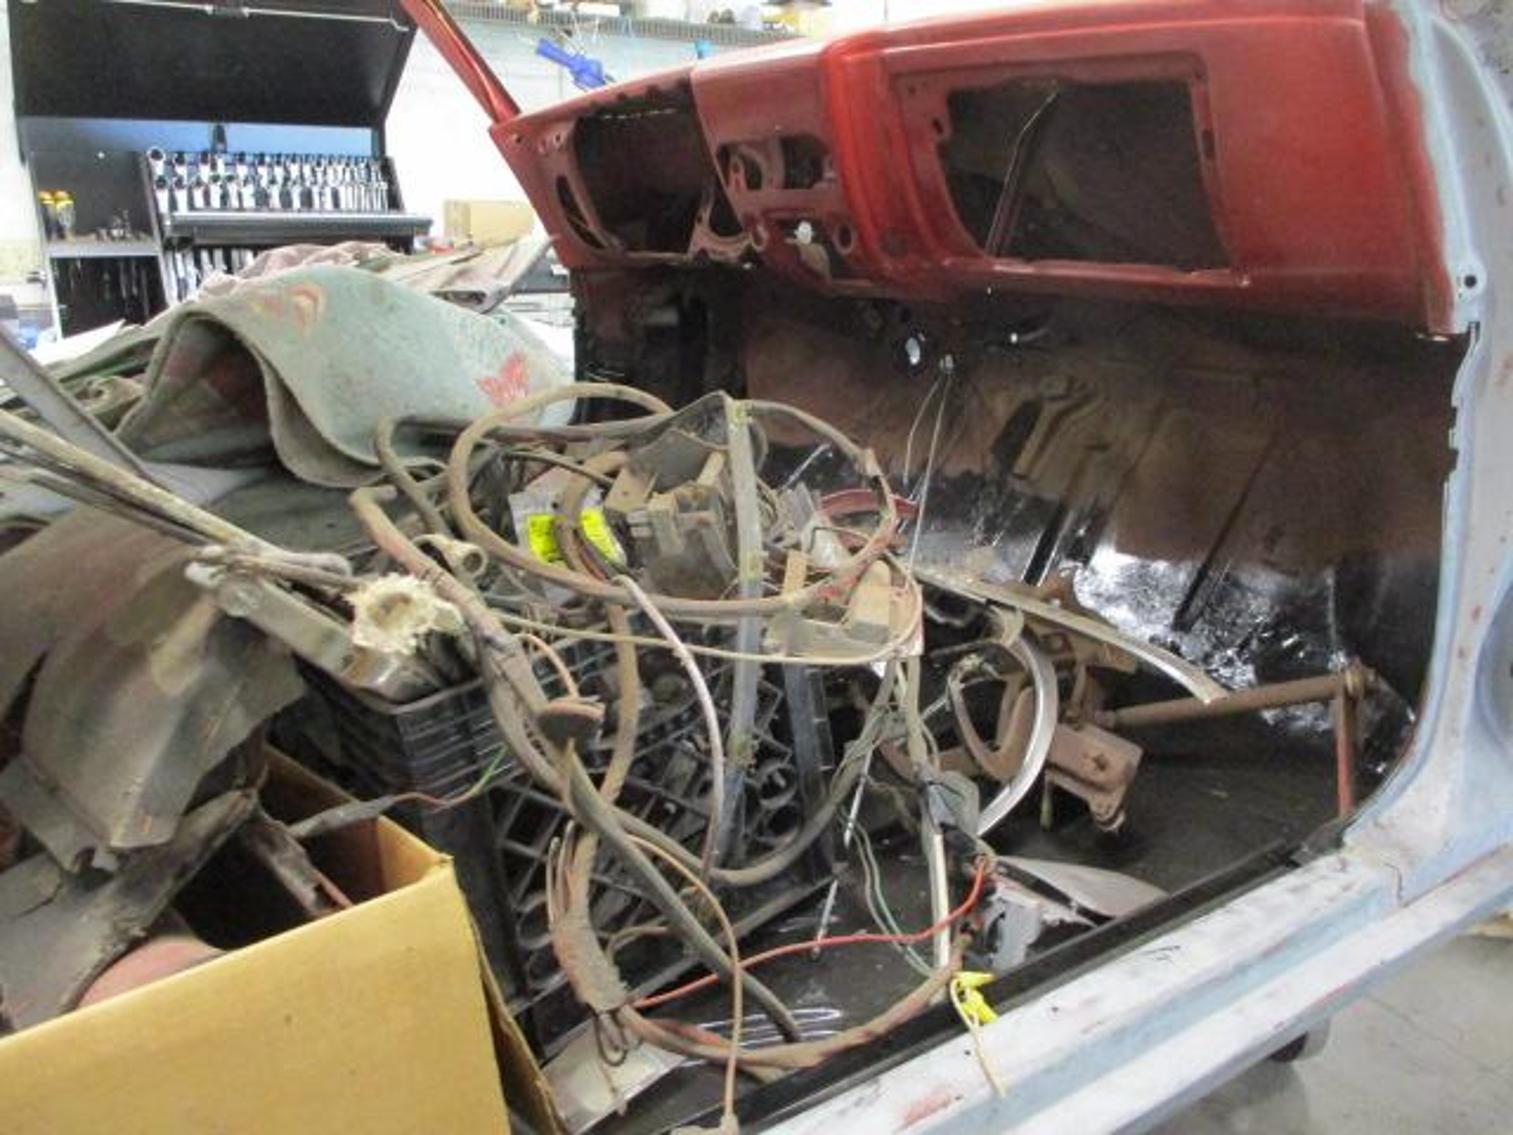 (2) 1966 Corvair Project Cars Opportunity With Car Rotisserie